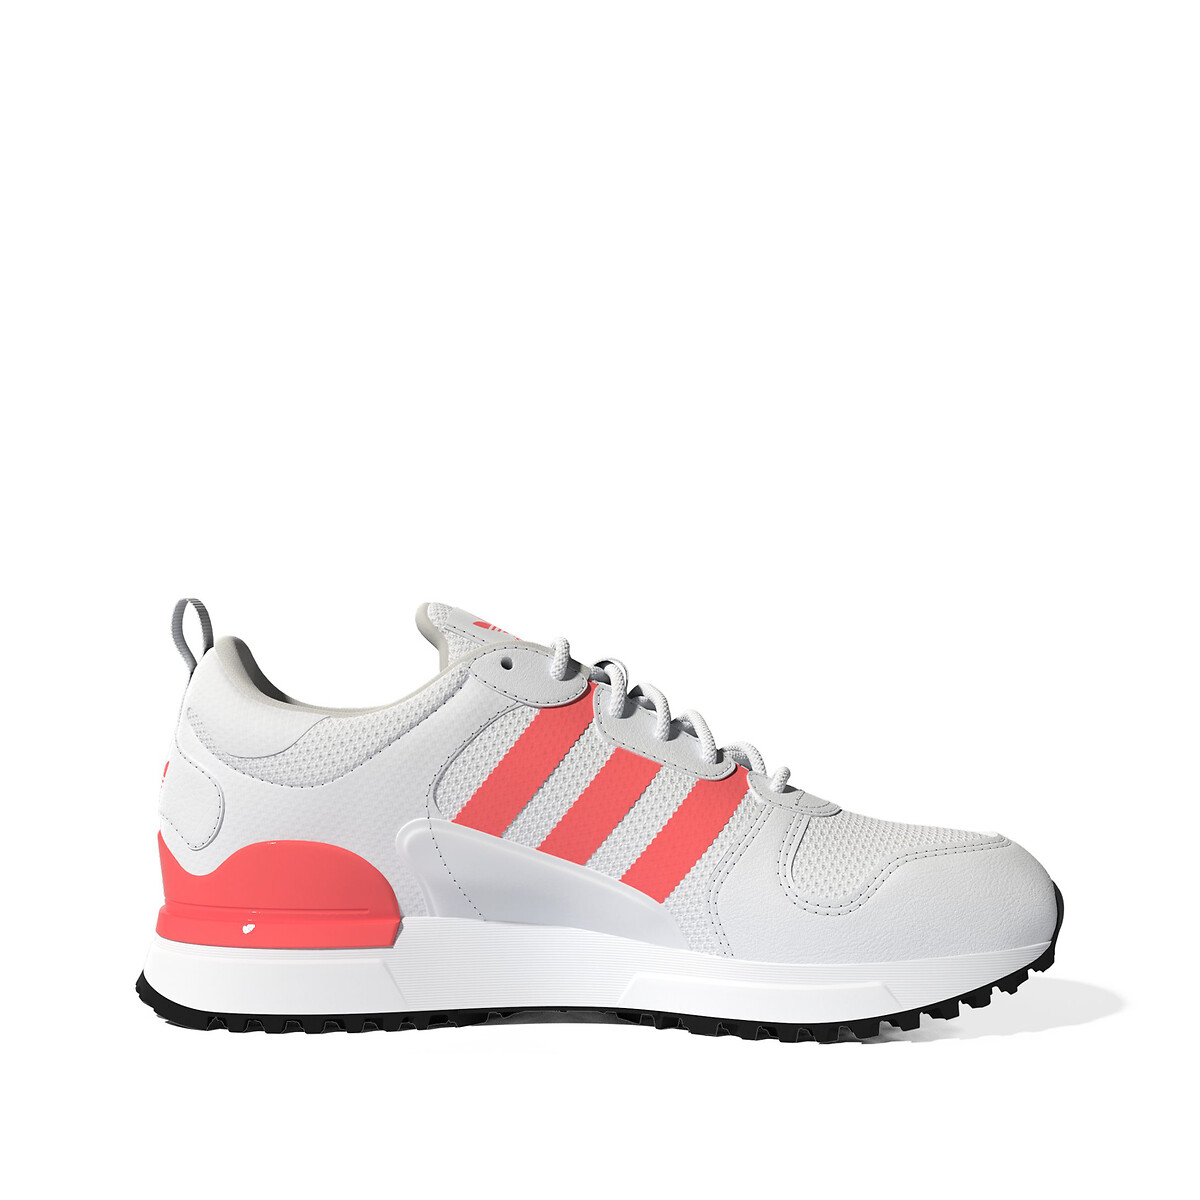 Menagerry Marty Fielding Onnodig Sneakers zx 700 hd wit Adidas Originals | La Redoute